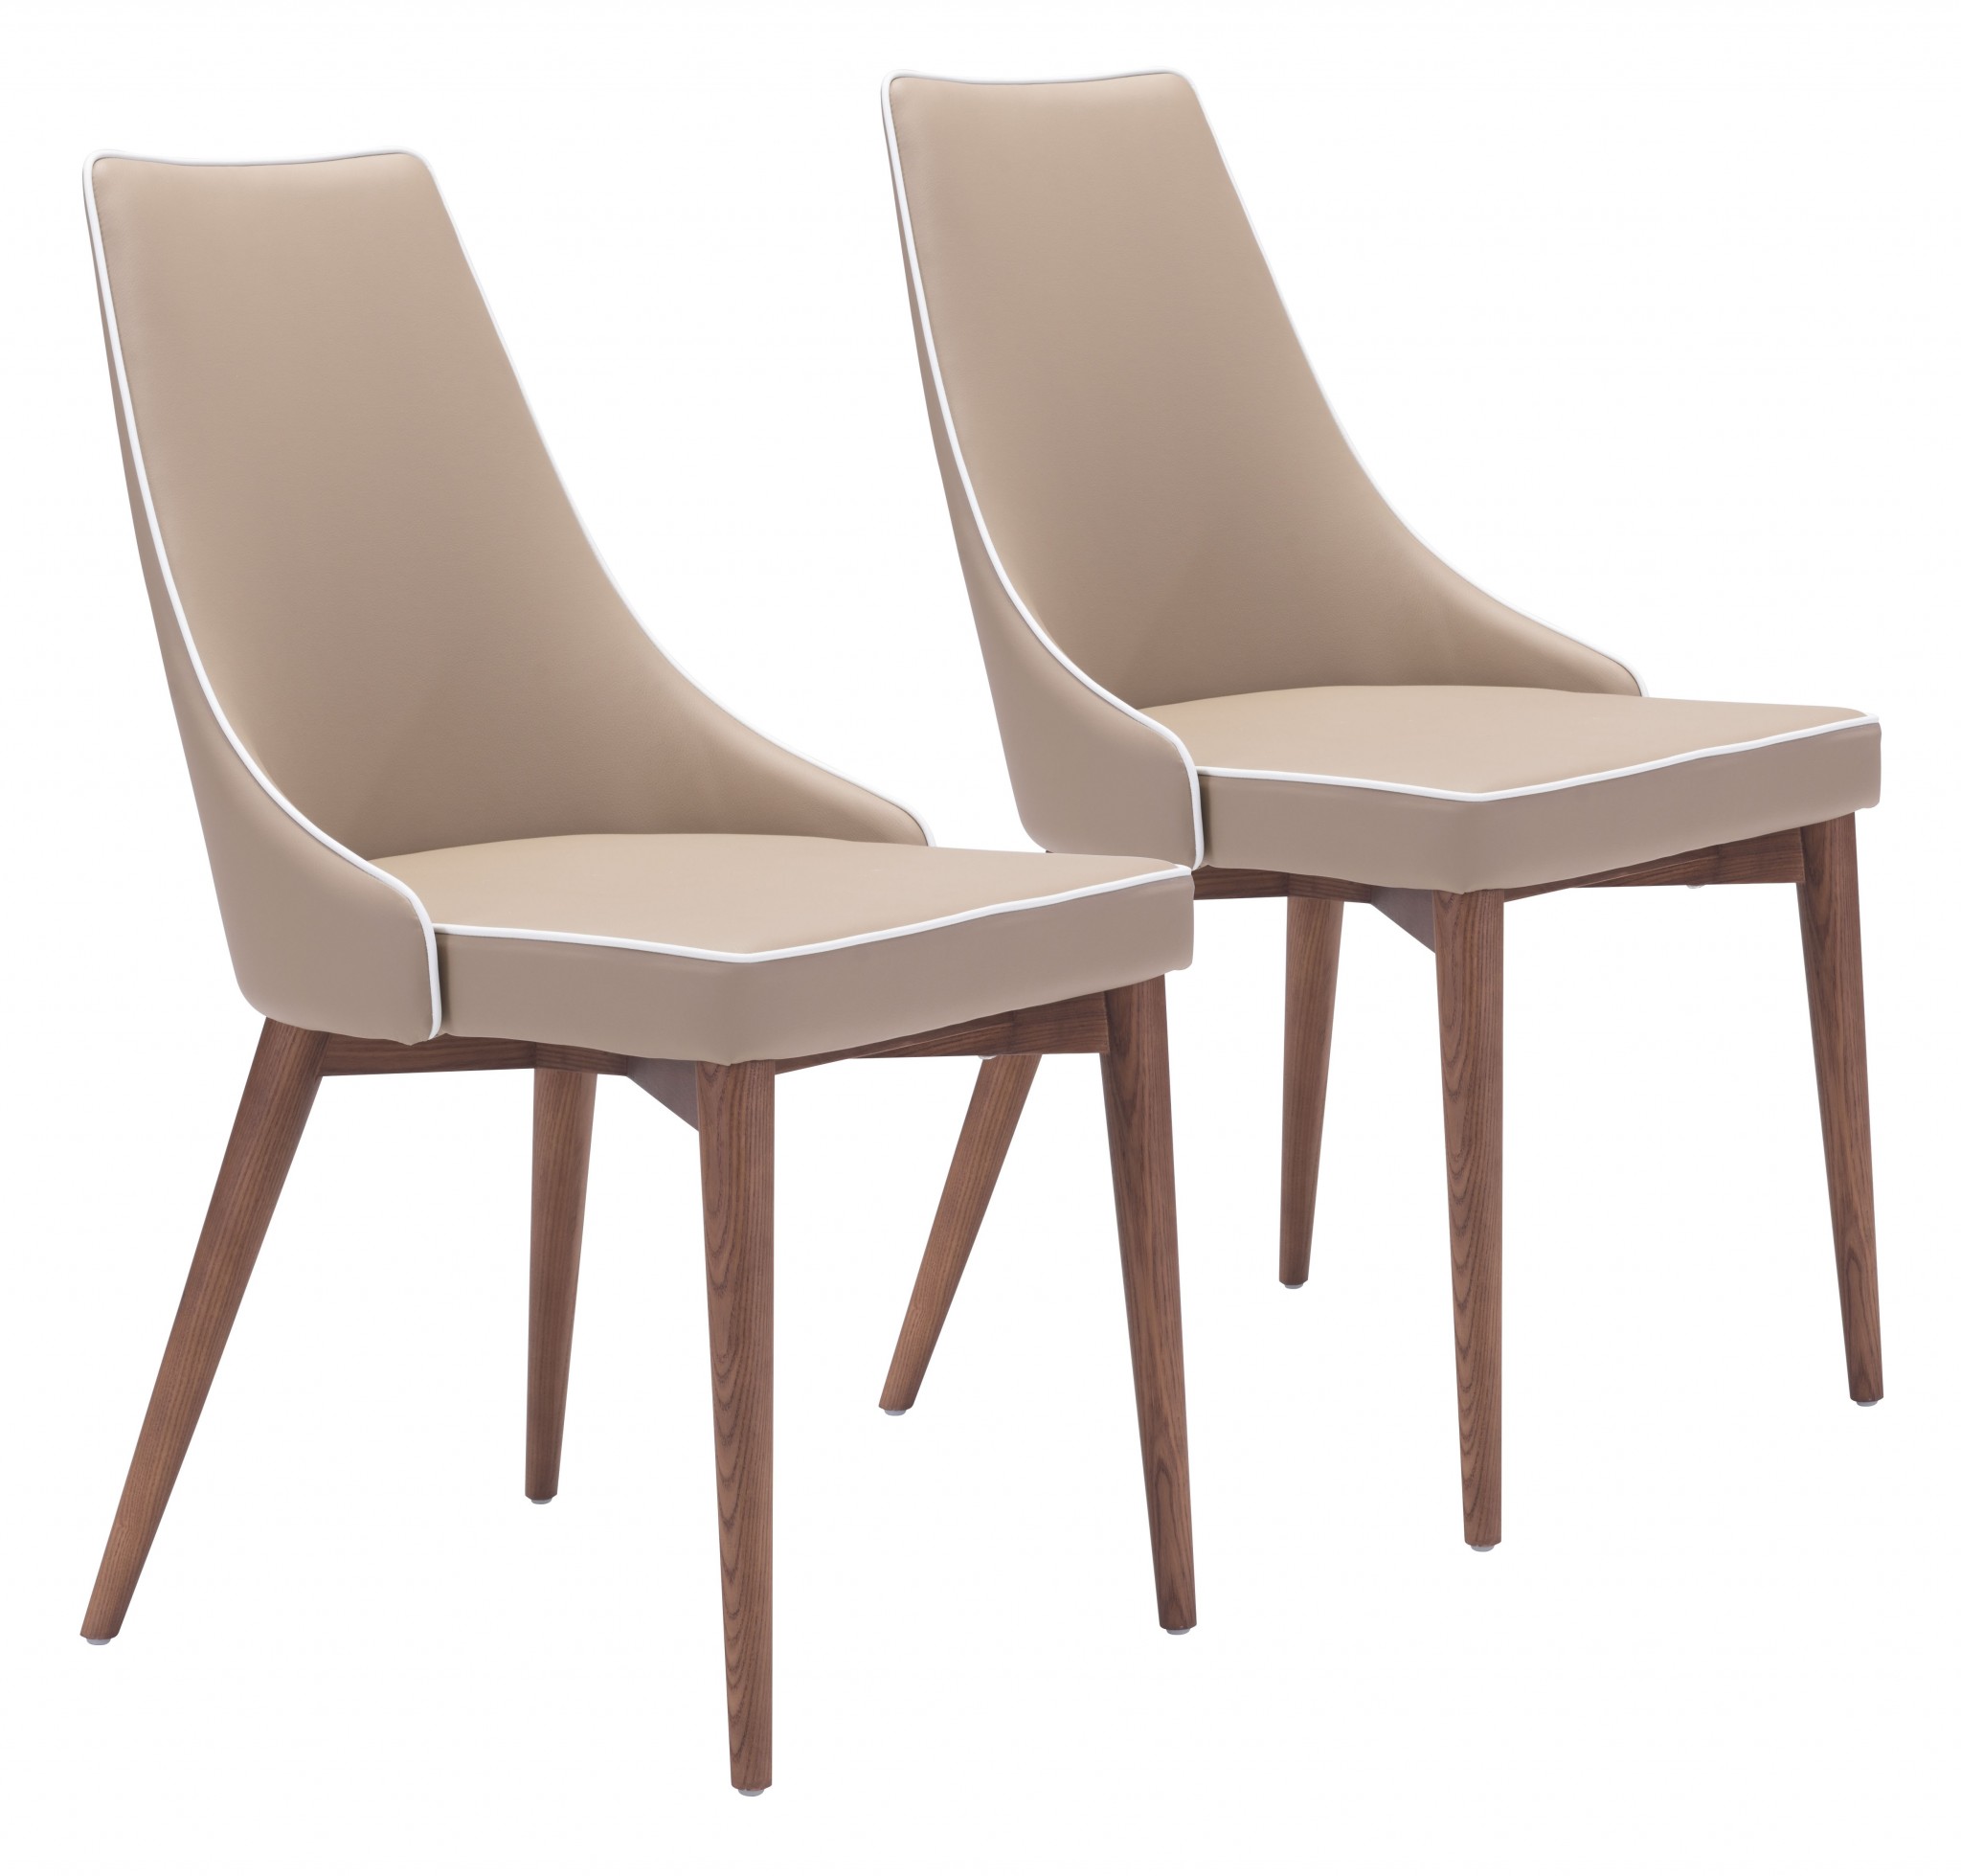 Set of Two Beige with White Piping and Walnut Dining Chairs